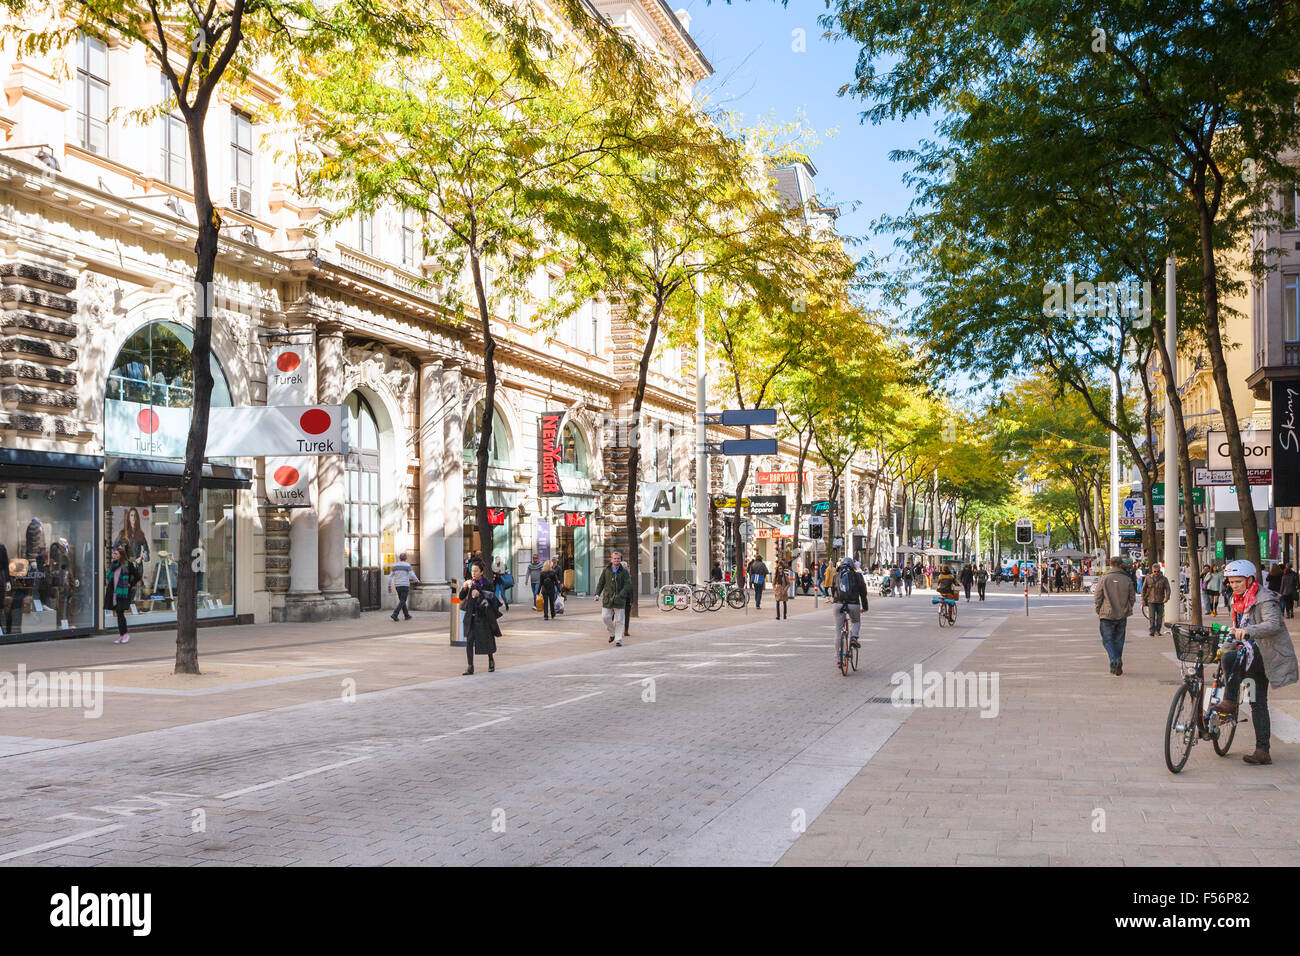 VIENNA, AUSTRIA - OCTOBER 1, 2015: people and shops on Mariahilferstrasse street in Vienna. Mariahilfer Strasse is the largest a Stock Photo